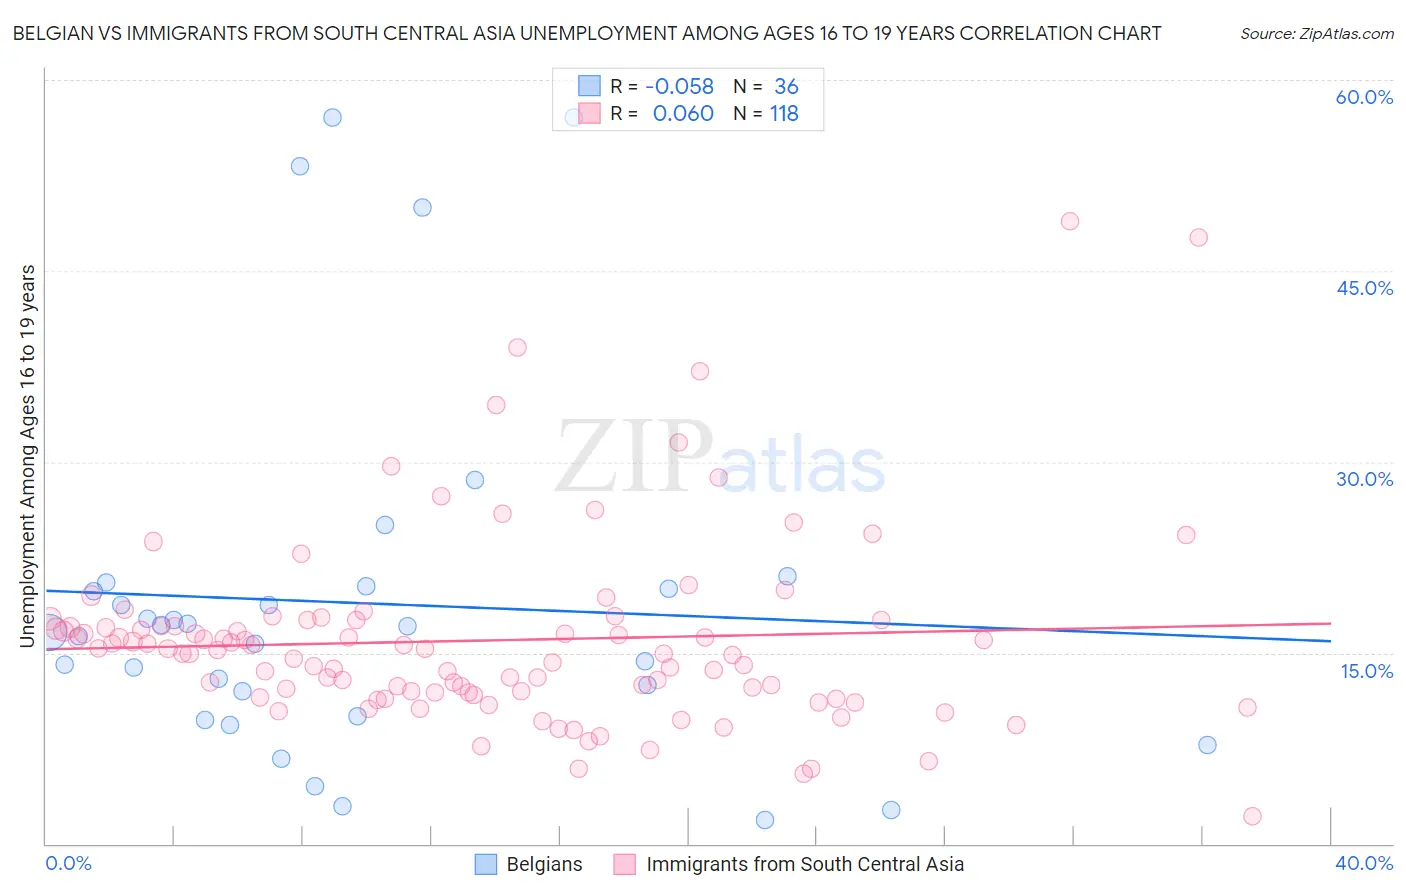 Belgian vs Immigrants from South Central Asia Unemployment Among Ages 16 to 19 years